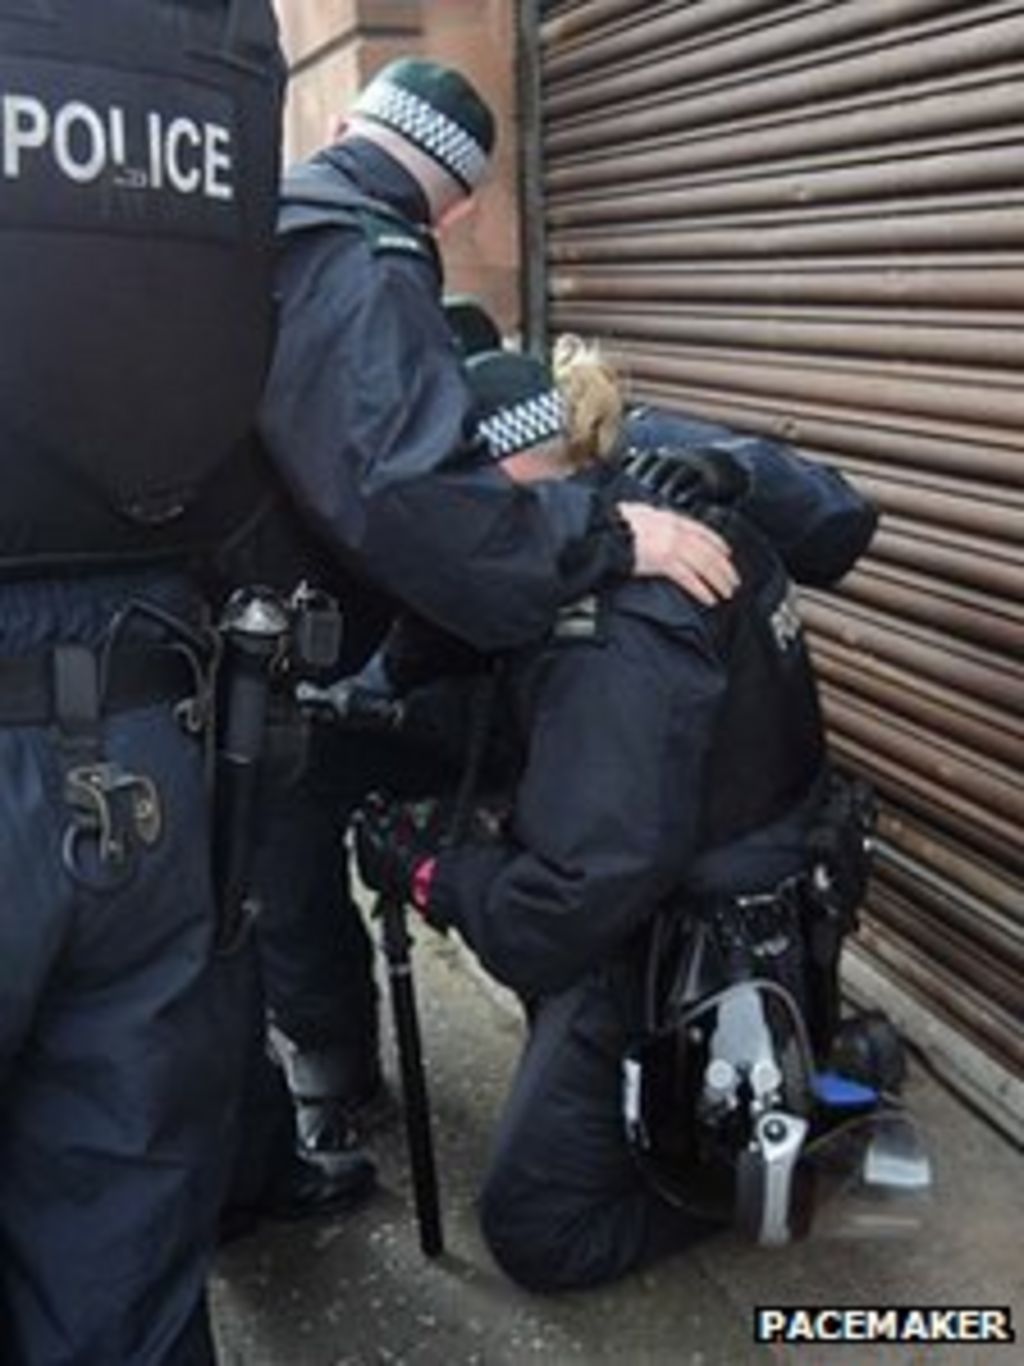 Three arrests after Belfast parade trouble - BBC News